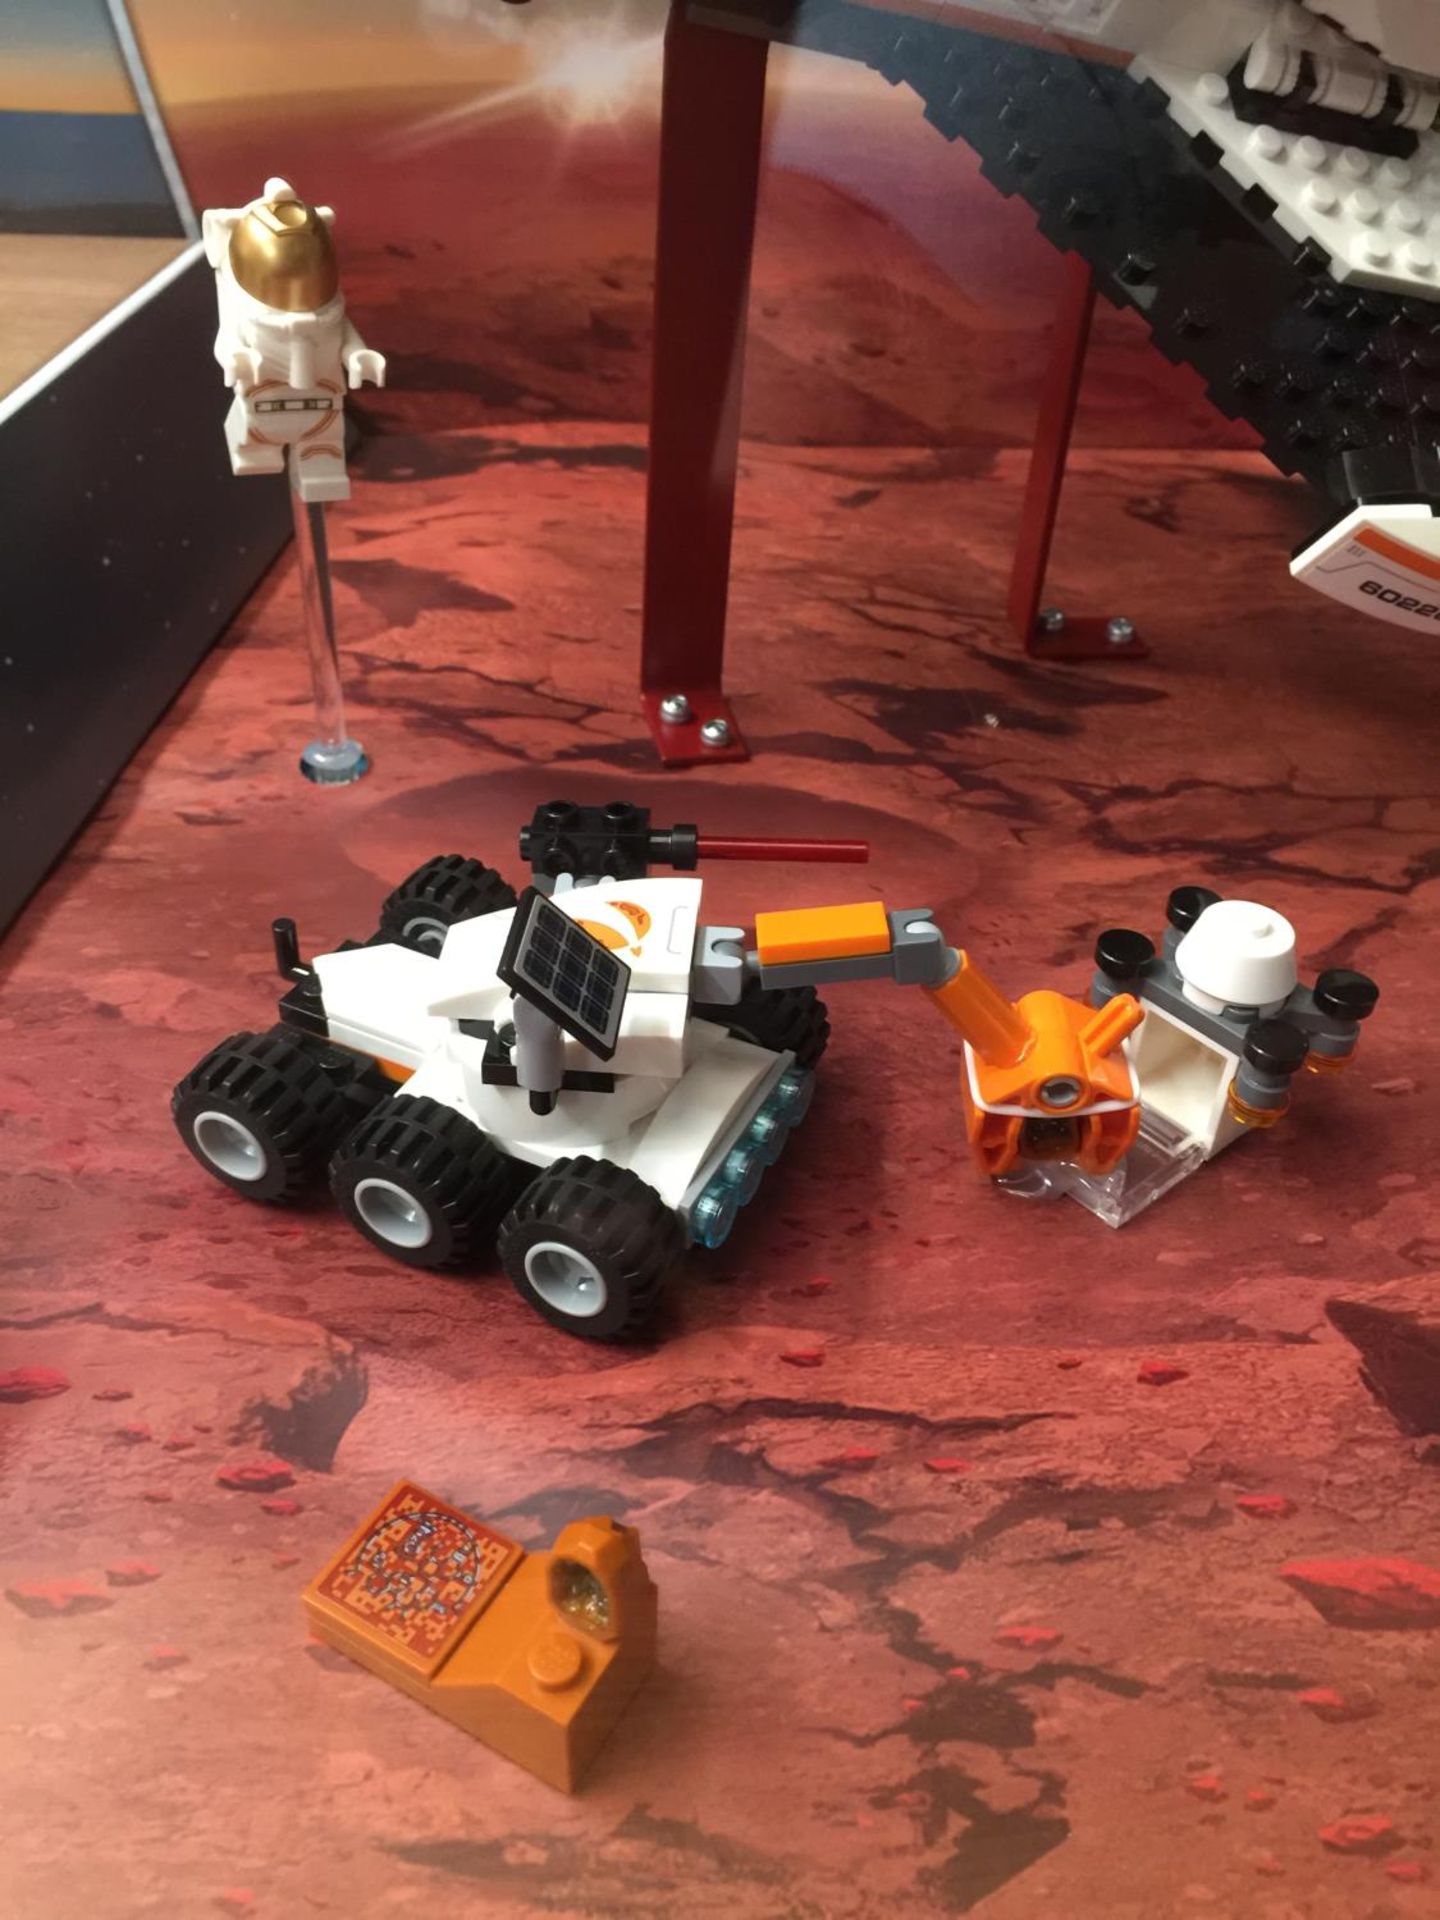 A LEGO CITY KIT NO. 60226, MARS EXPLORATION, BUILT AND IN DISPLAY CASE - Image 7 of 7